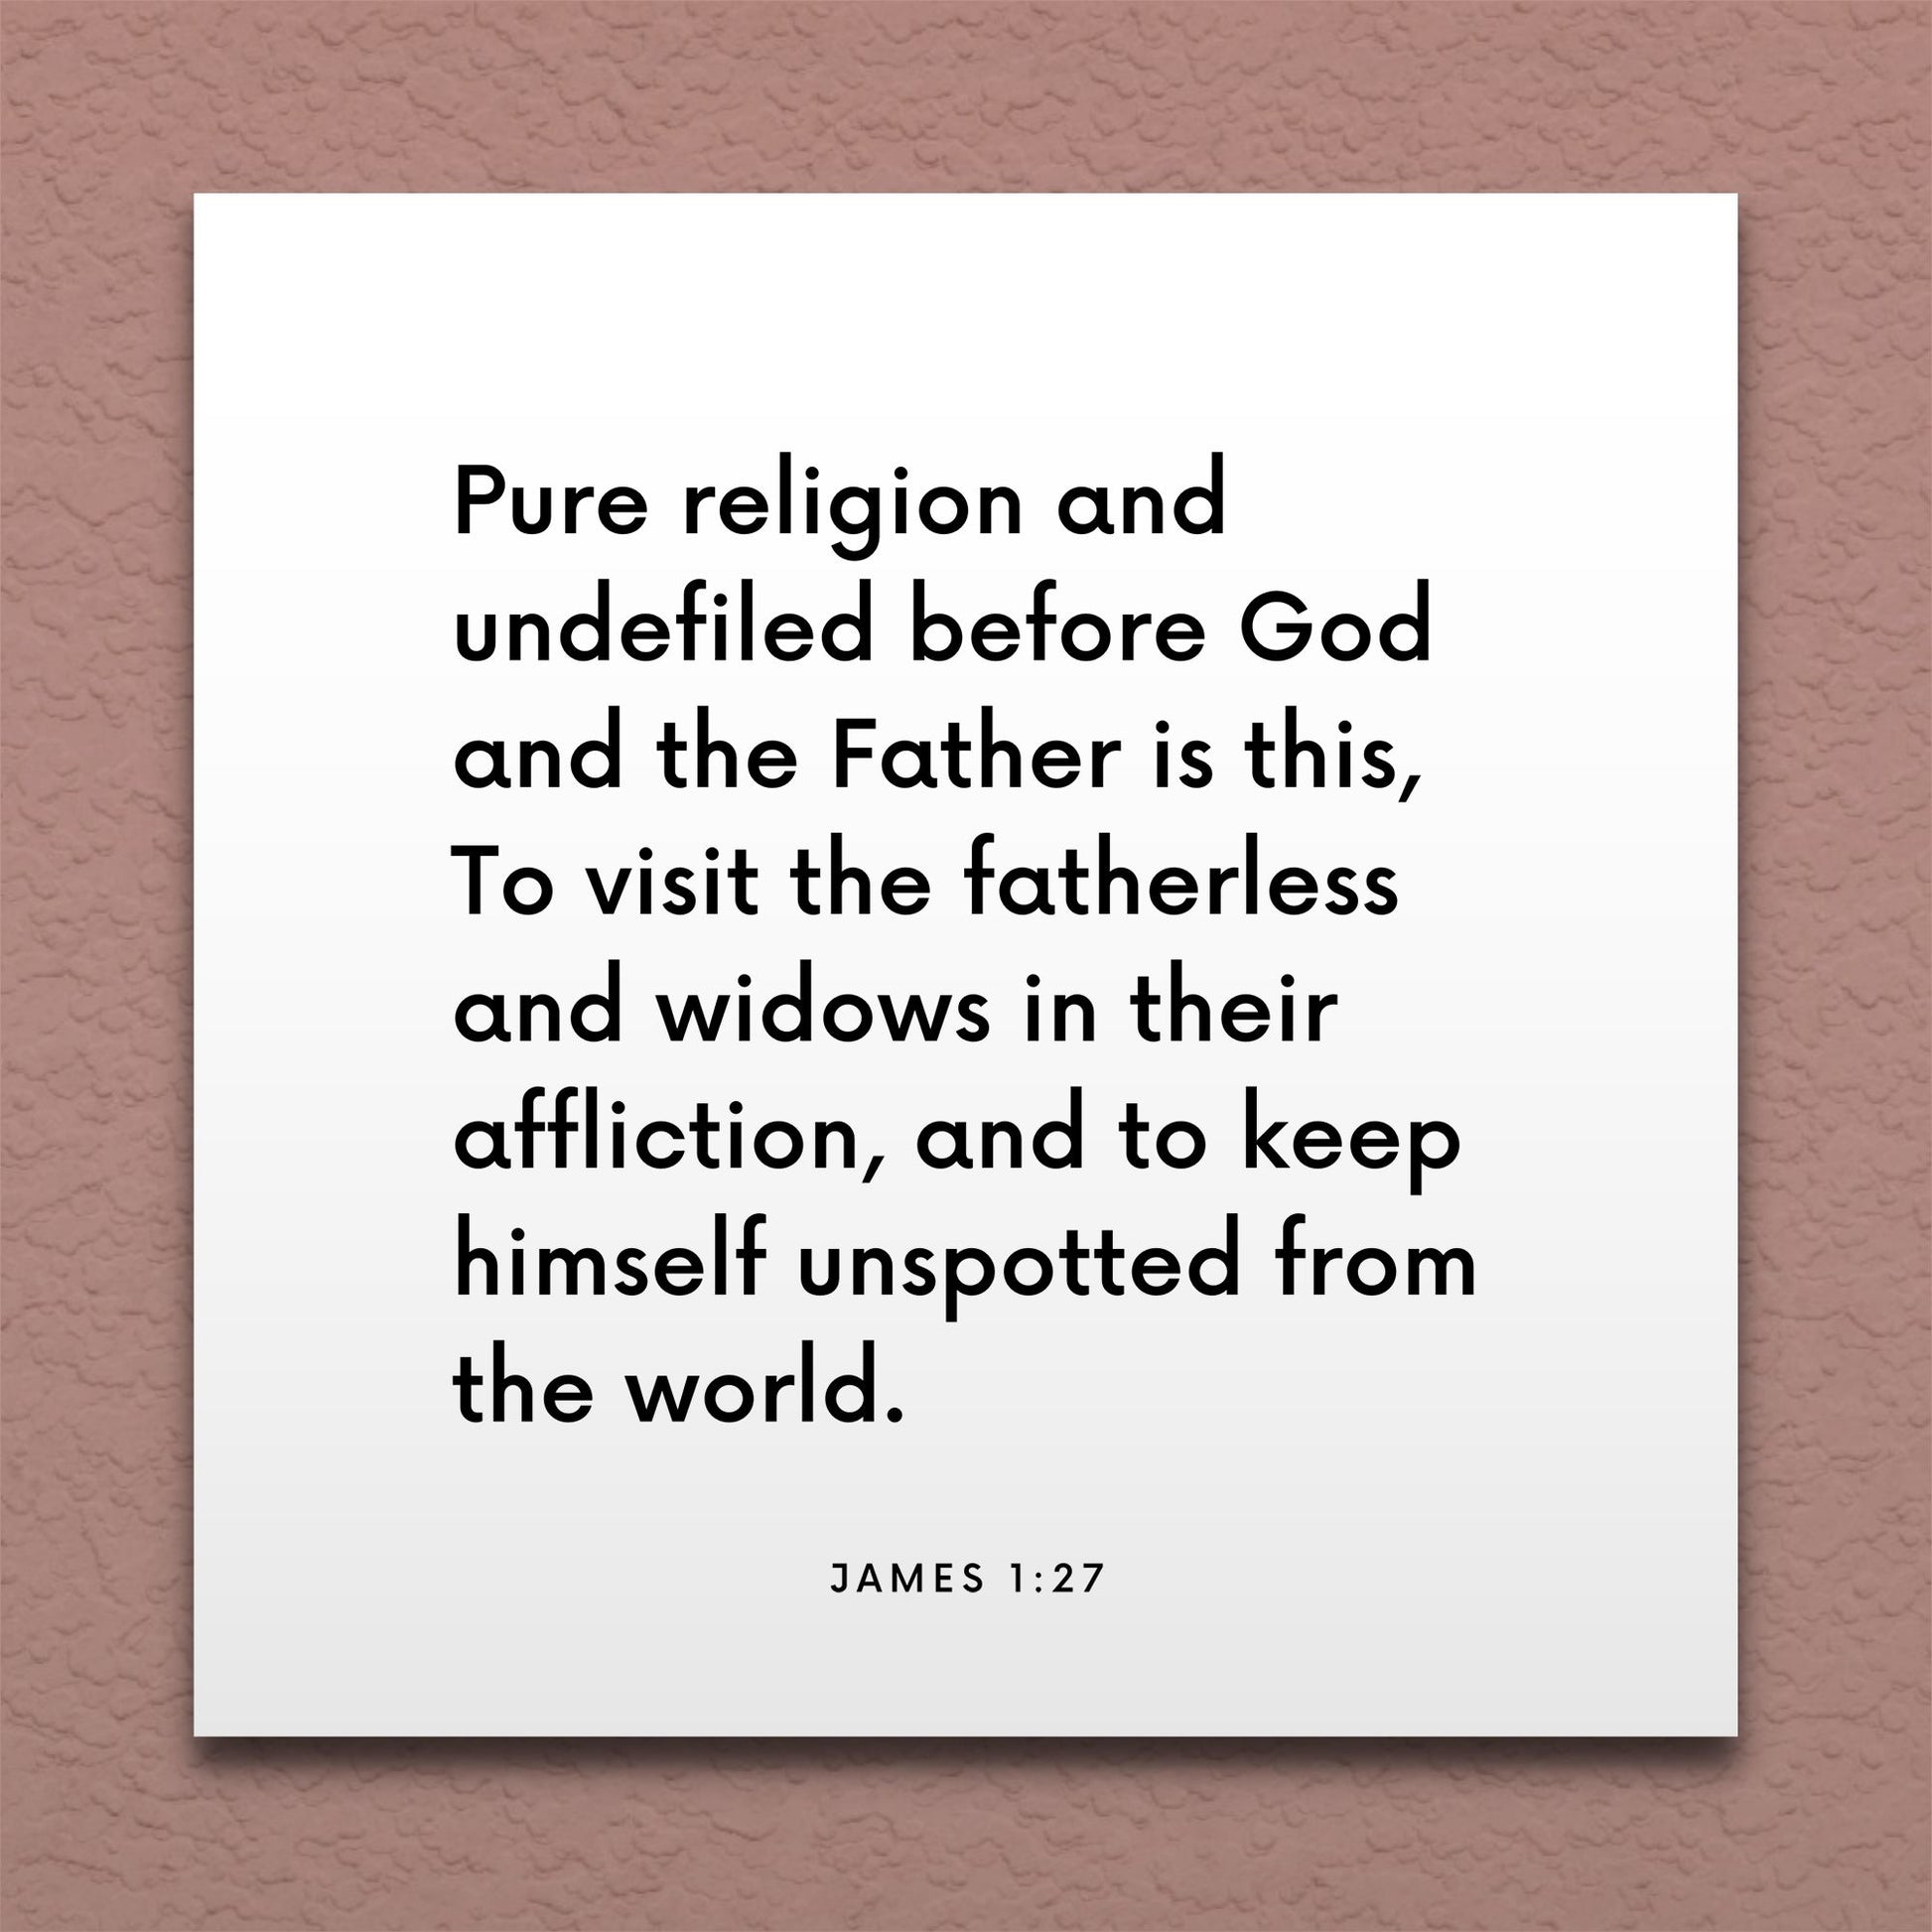 Wall-mounted scripture tile for James 1:27 - "Pure religion is this: to visit the fatherless and widows"